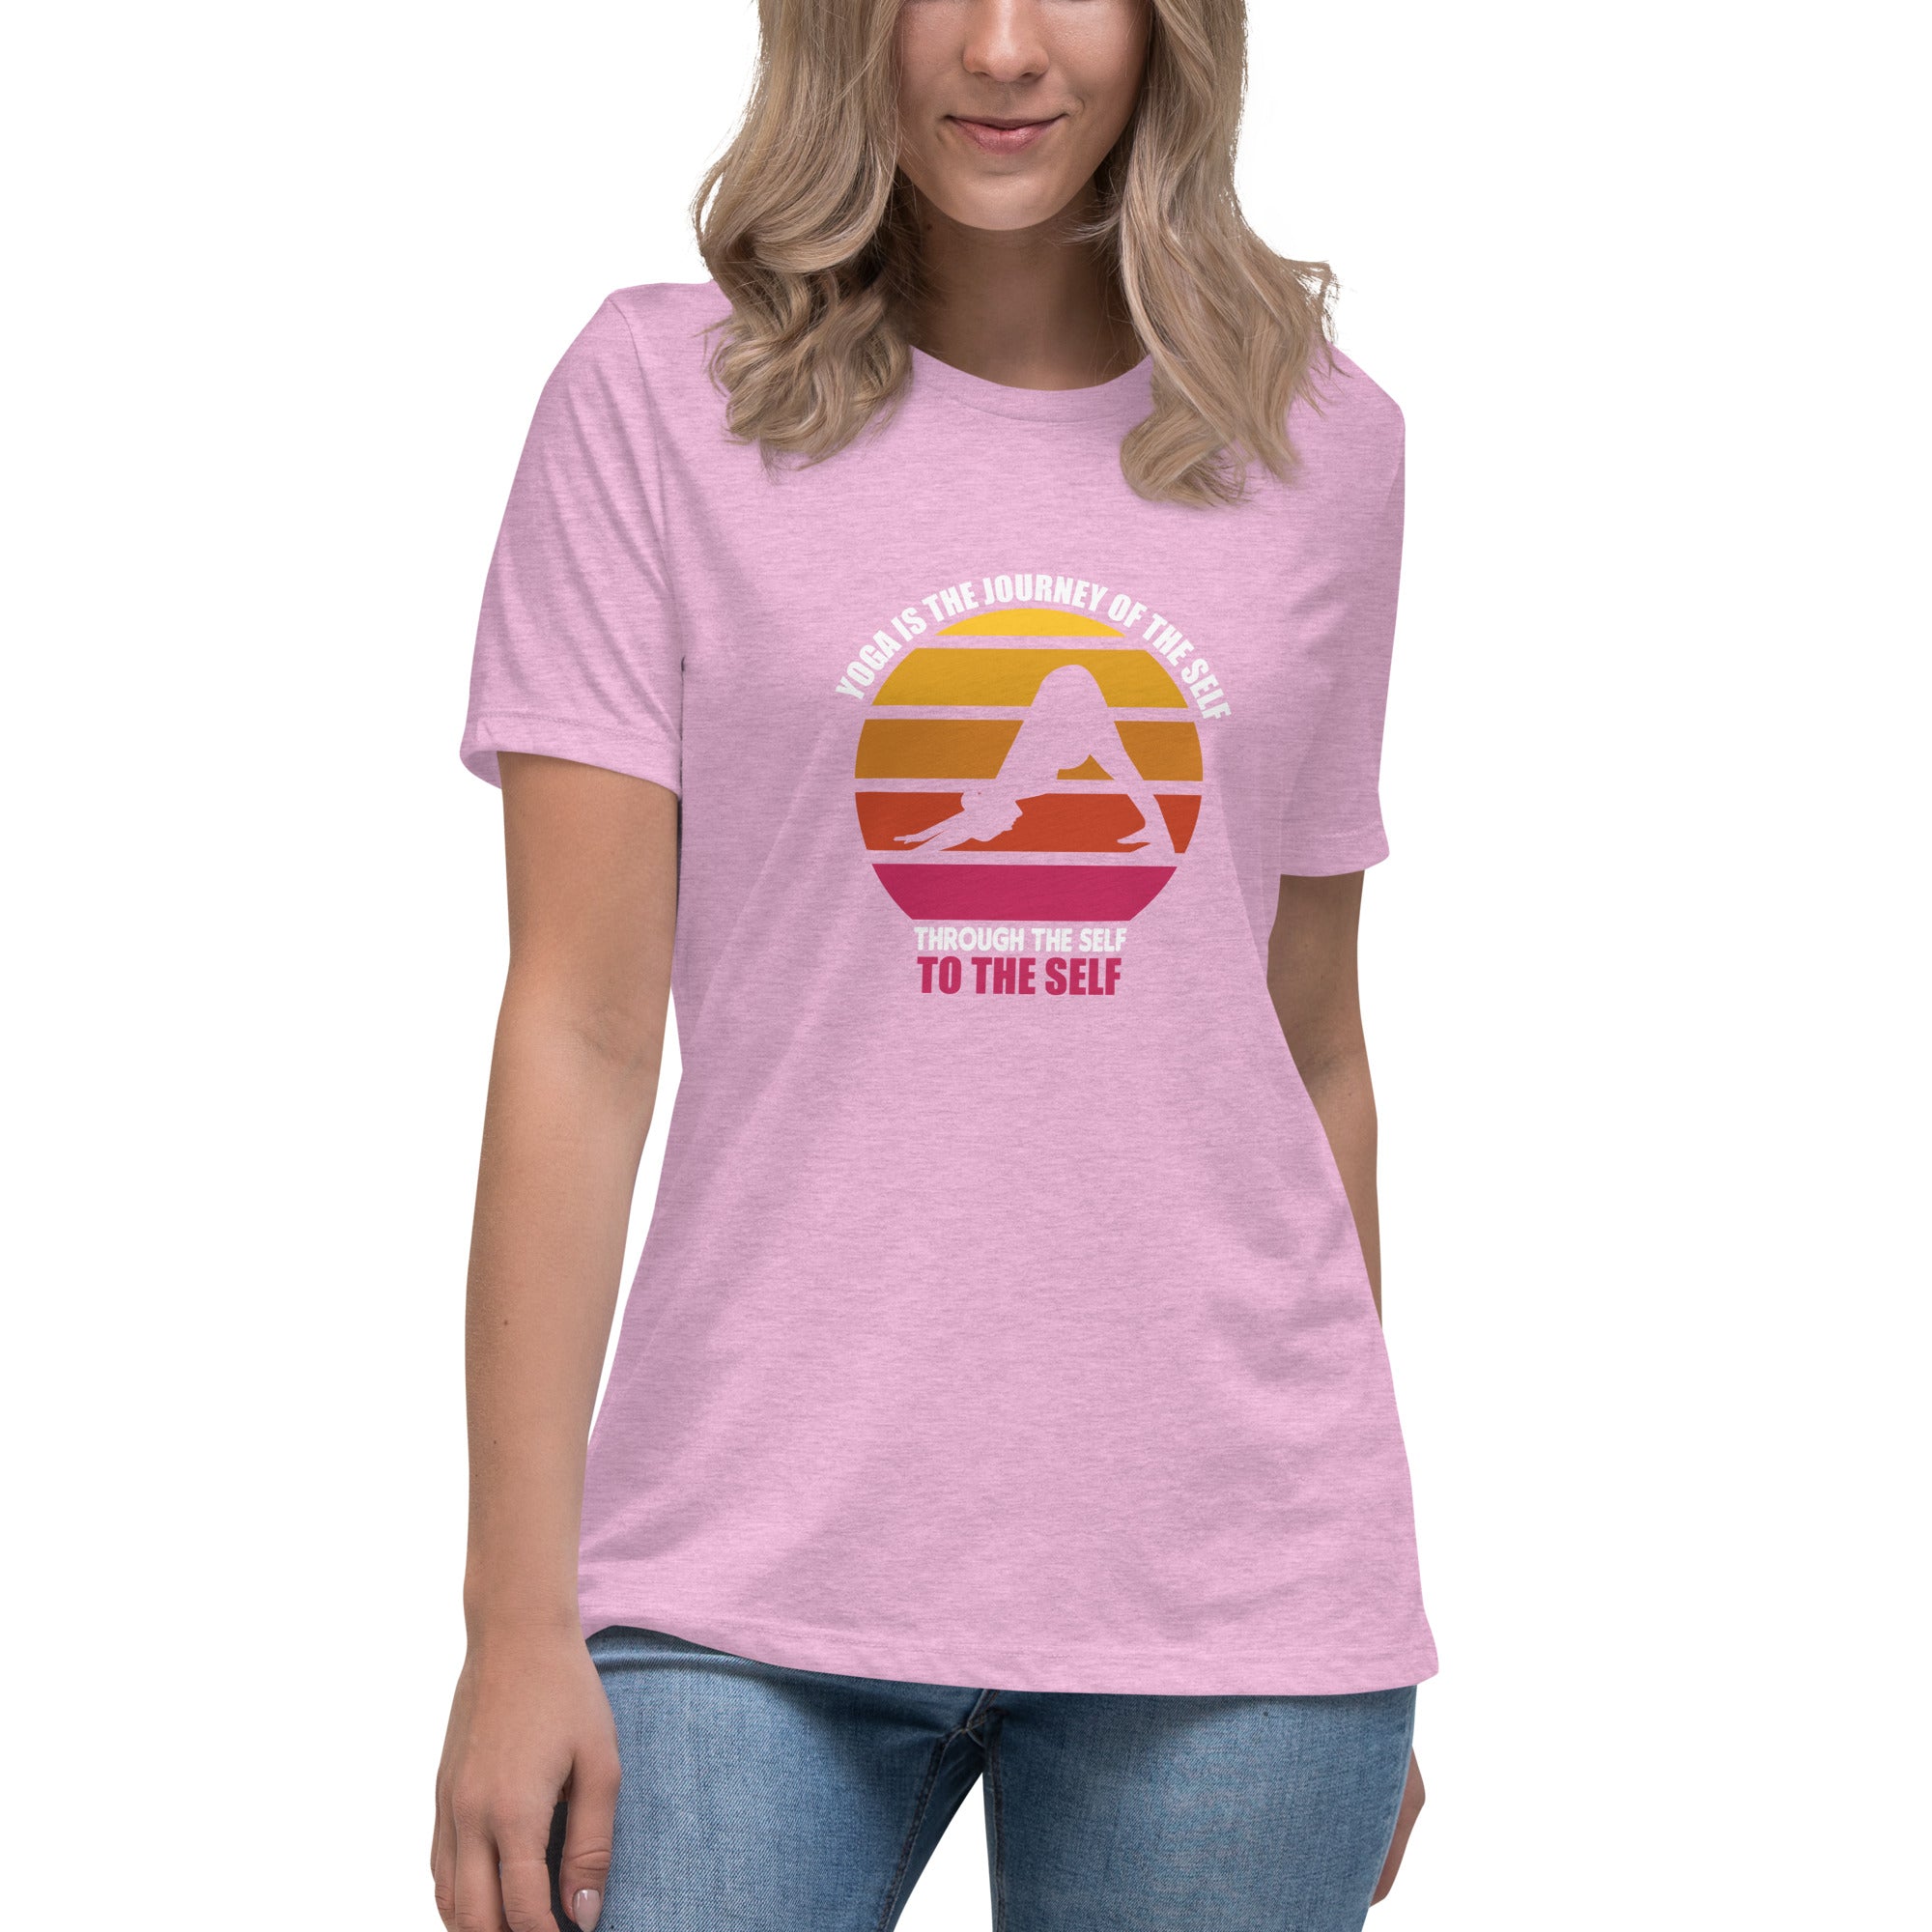 Journey of the Self Women's Relaxed T-Shirt